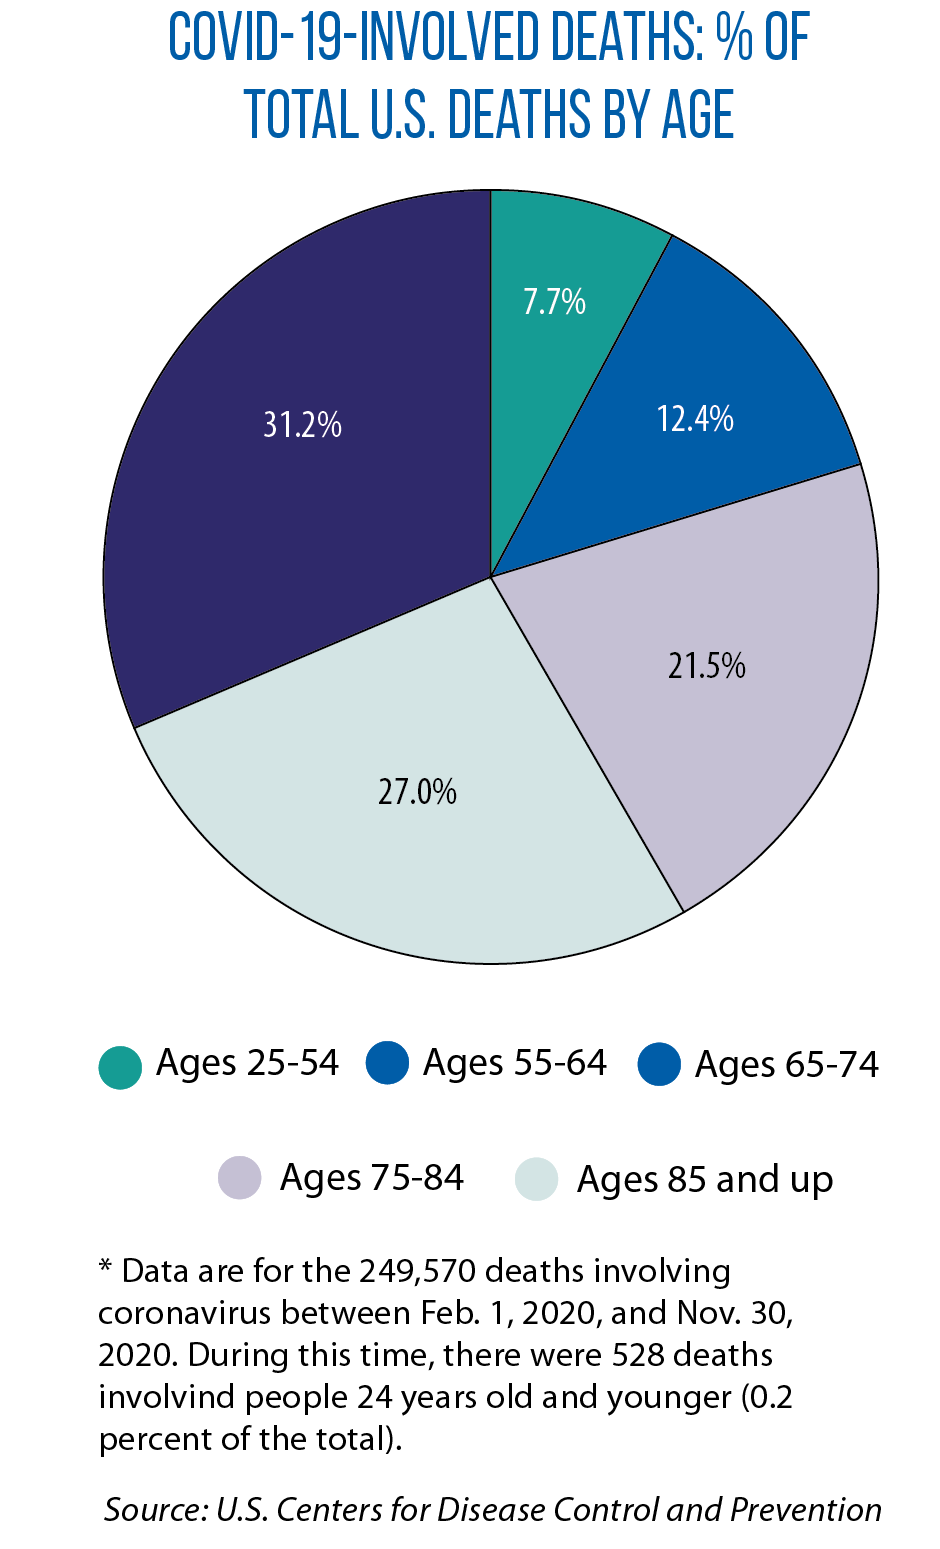 Pie chart showing COVID-19 deaths by age group